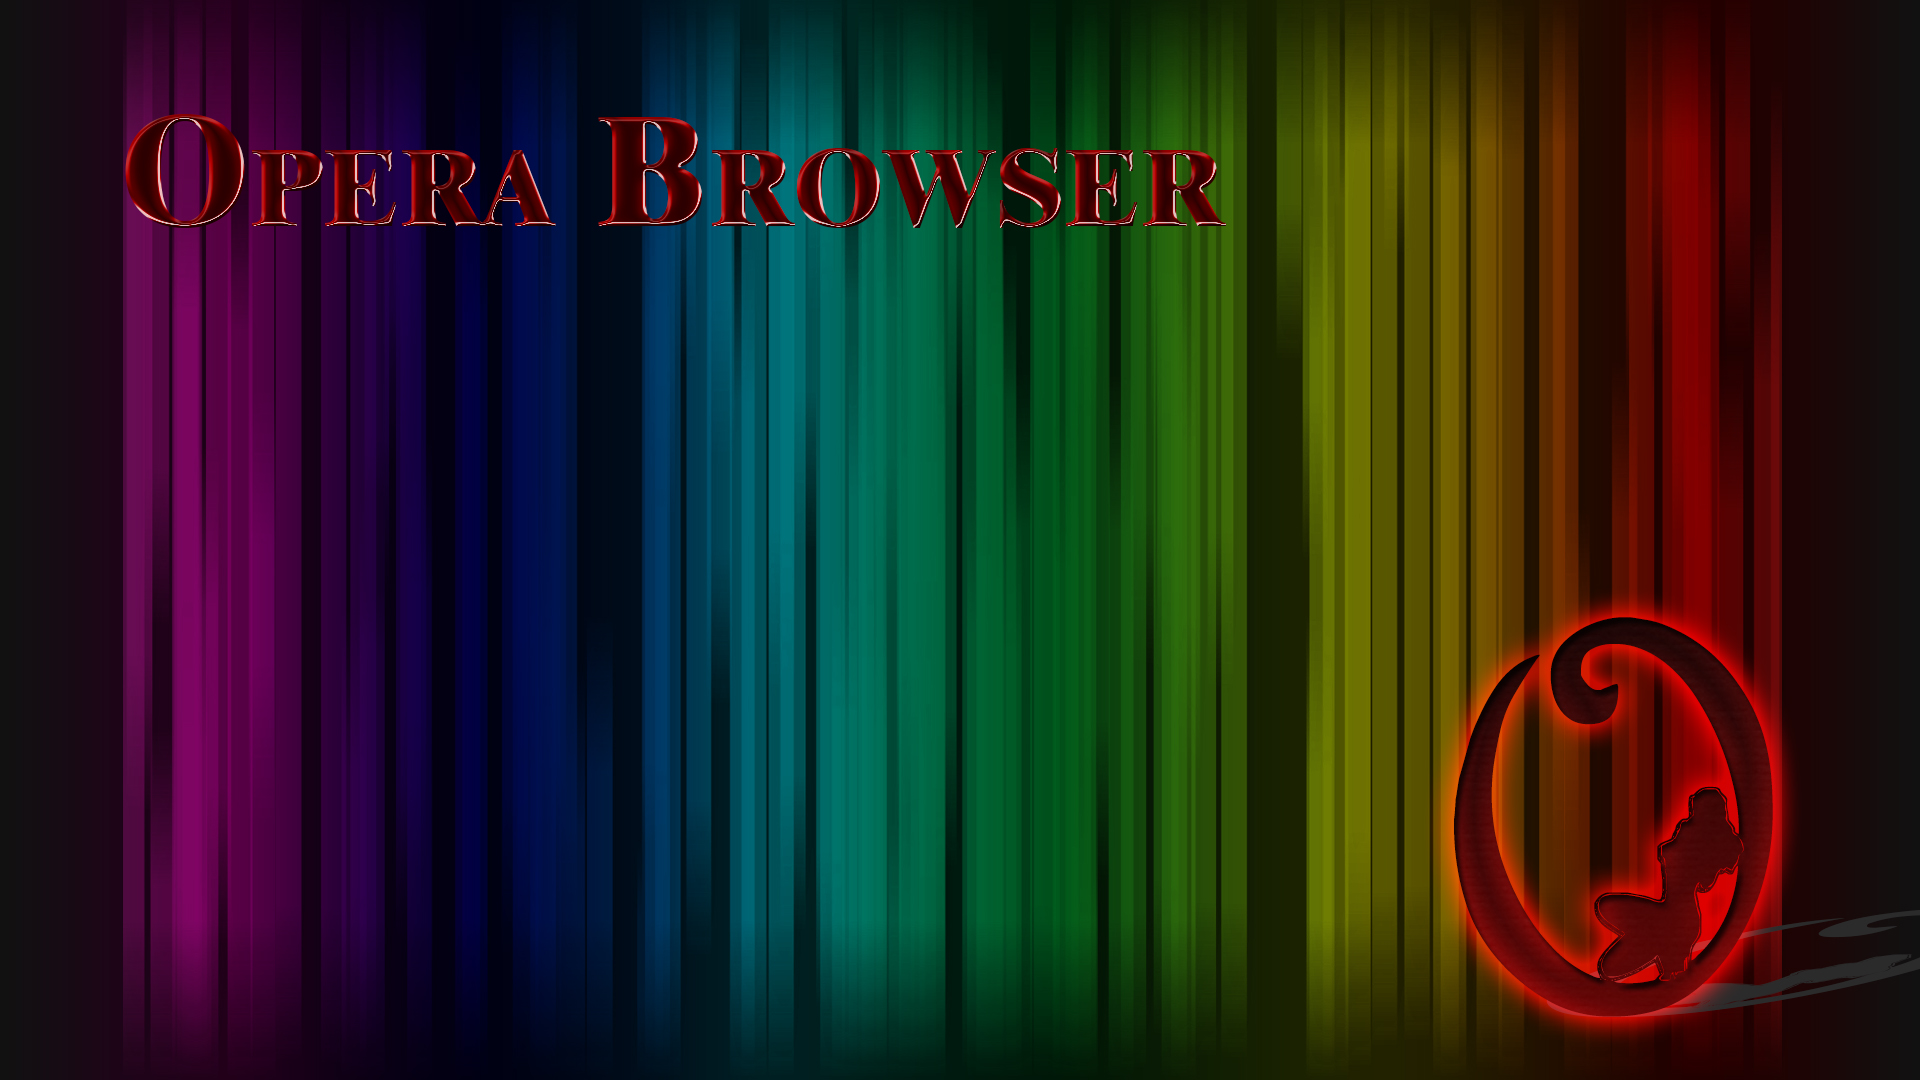 technology, opera, browser, internet cell phone wallpapers